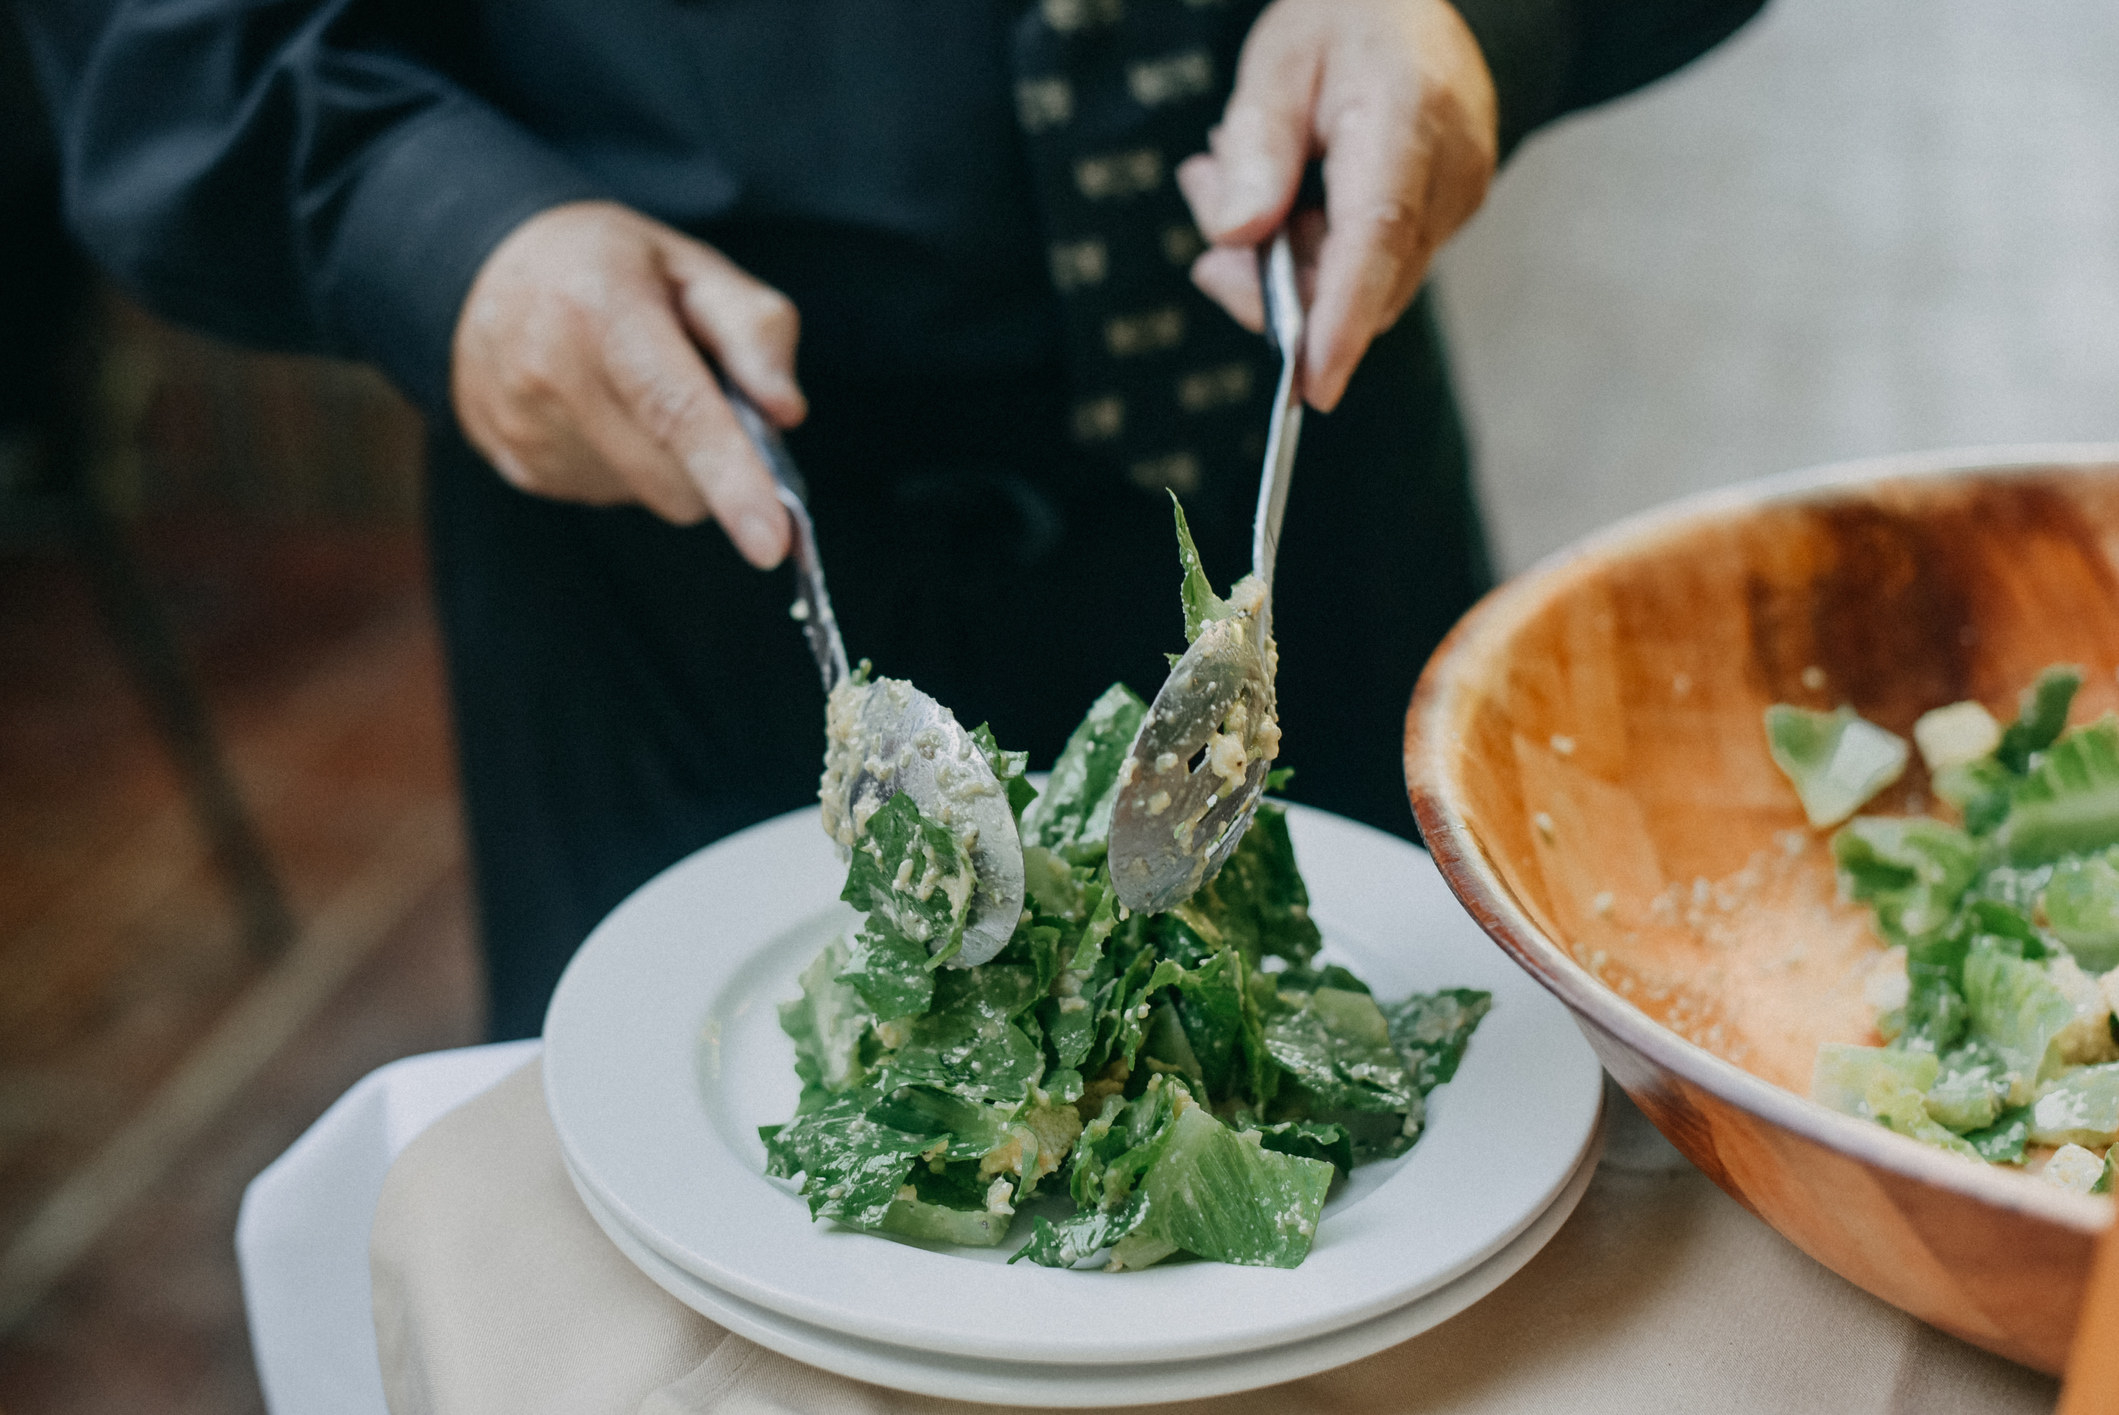 A waiter scooping salad onto a plate